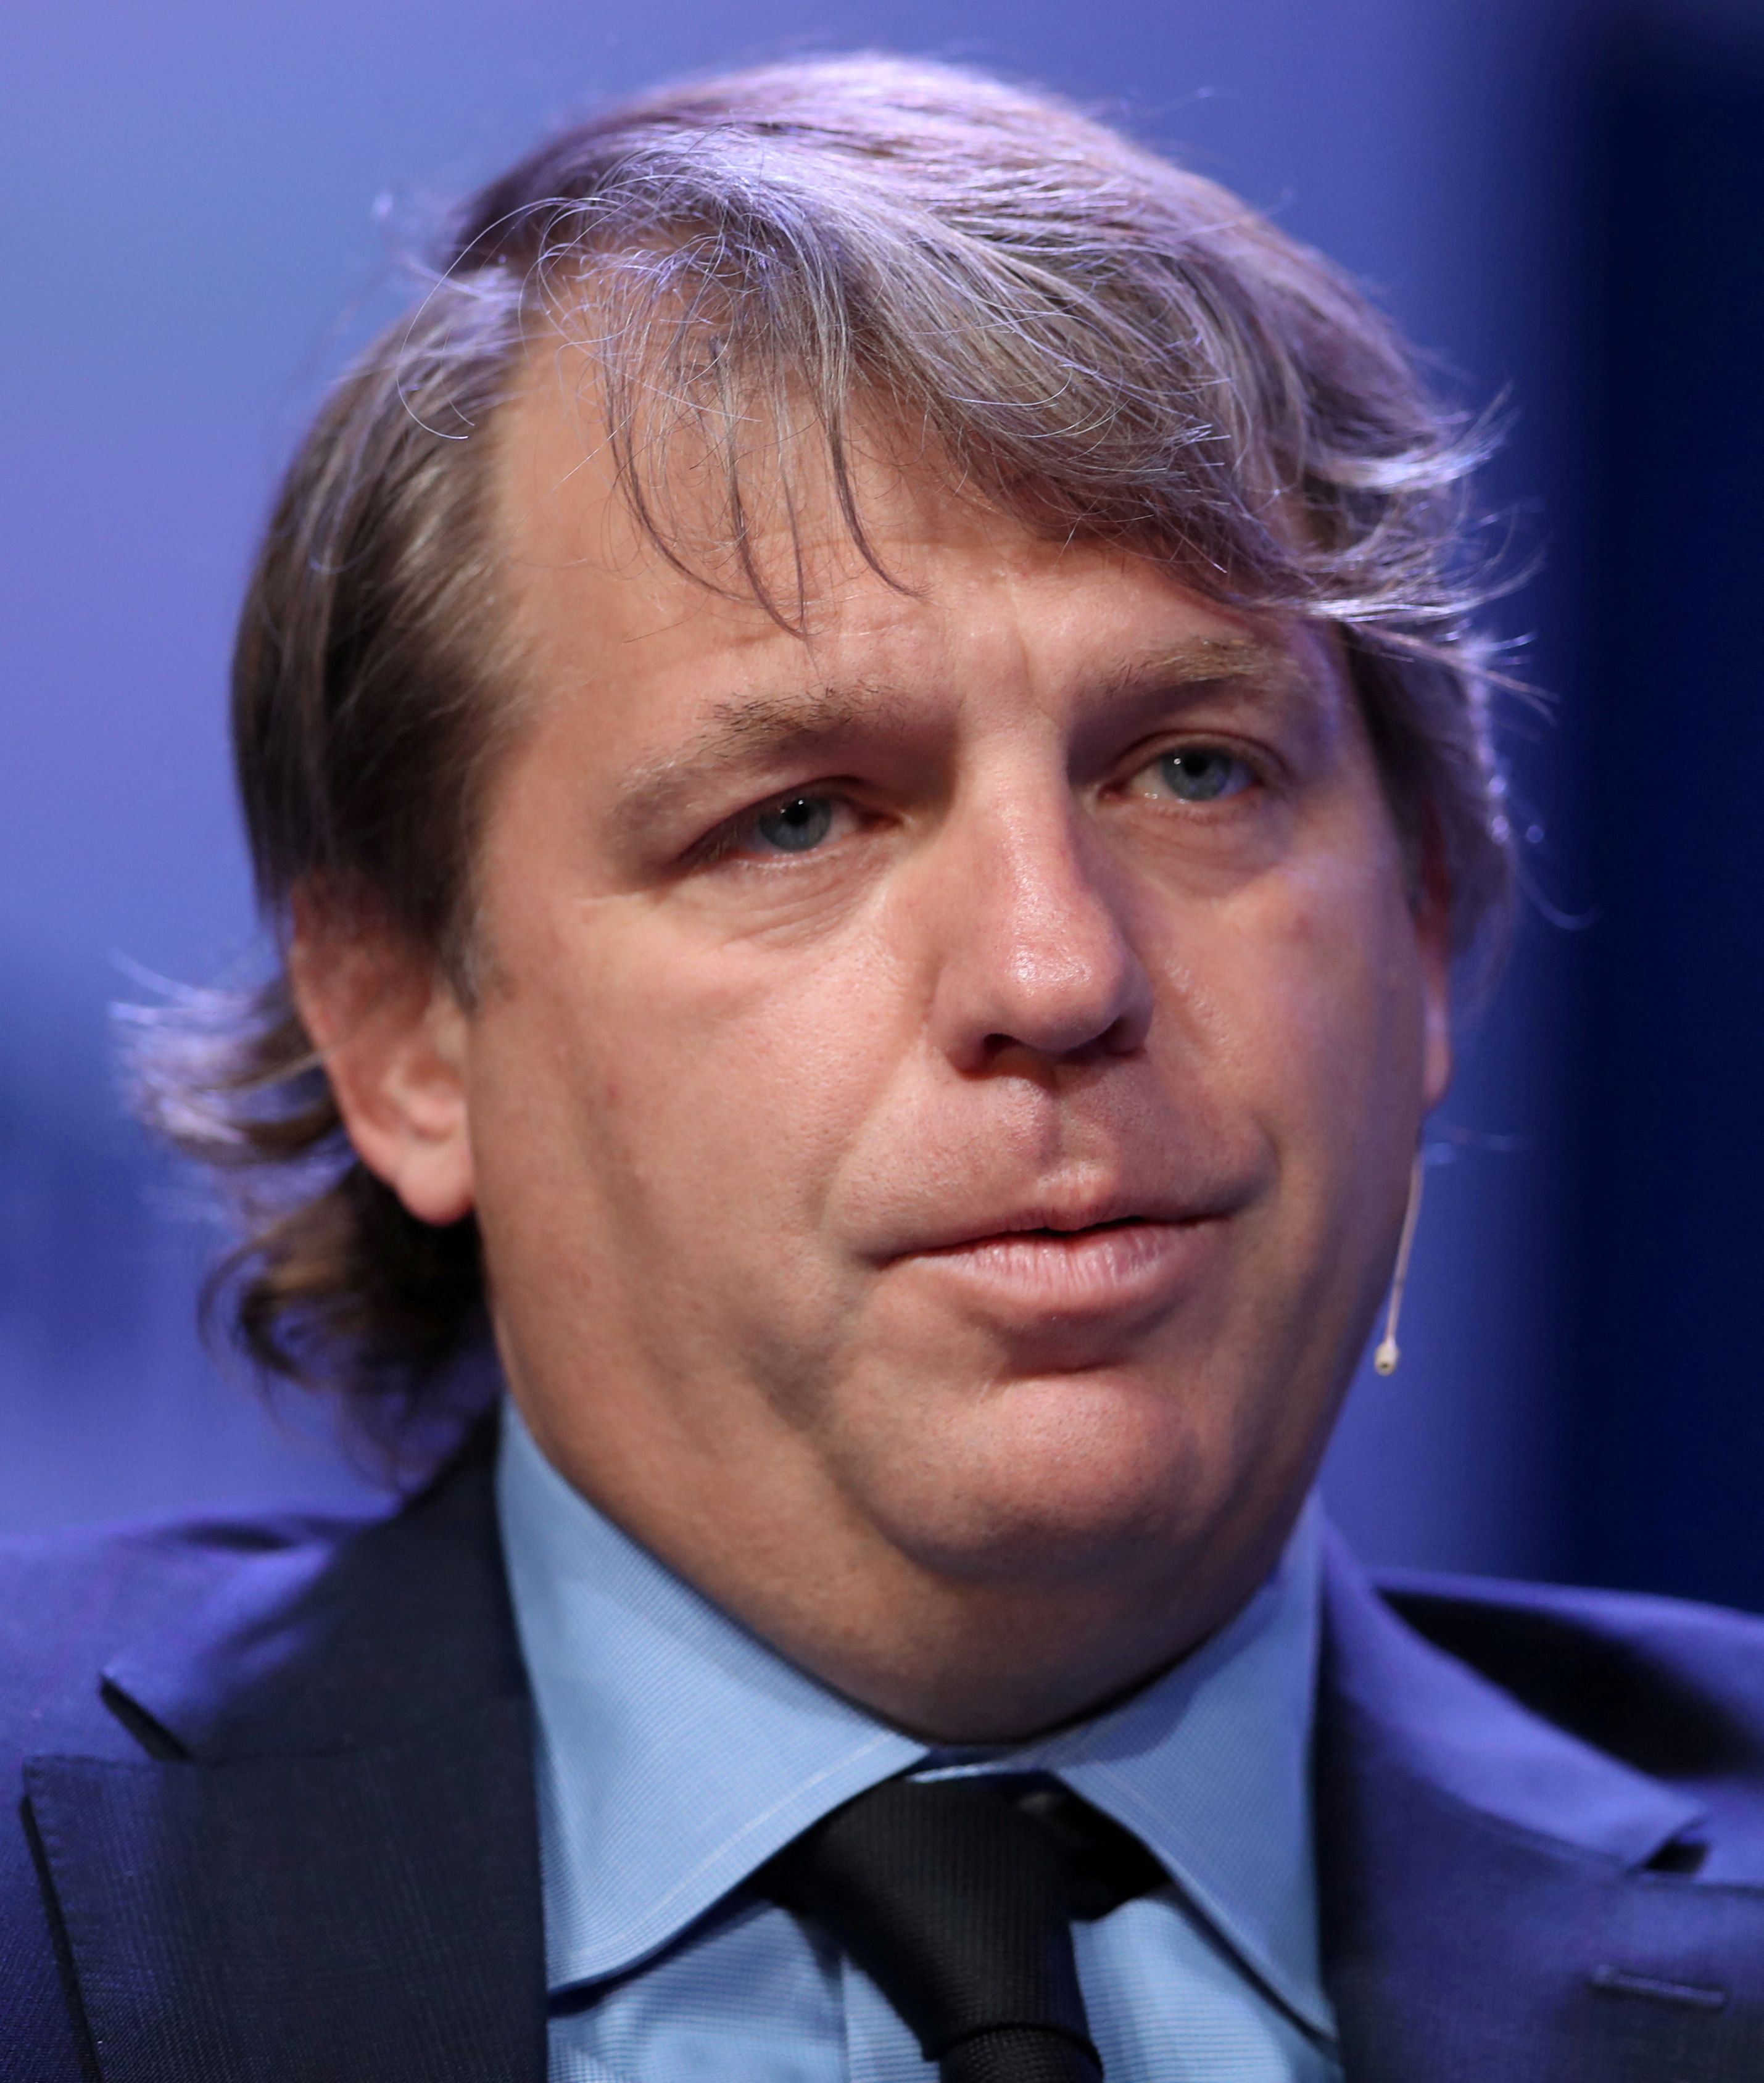 Chelsea confirm Todd Boehly consortium has signed \u00a34.25b agreement to buy club